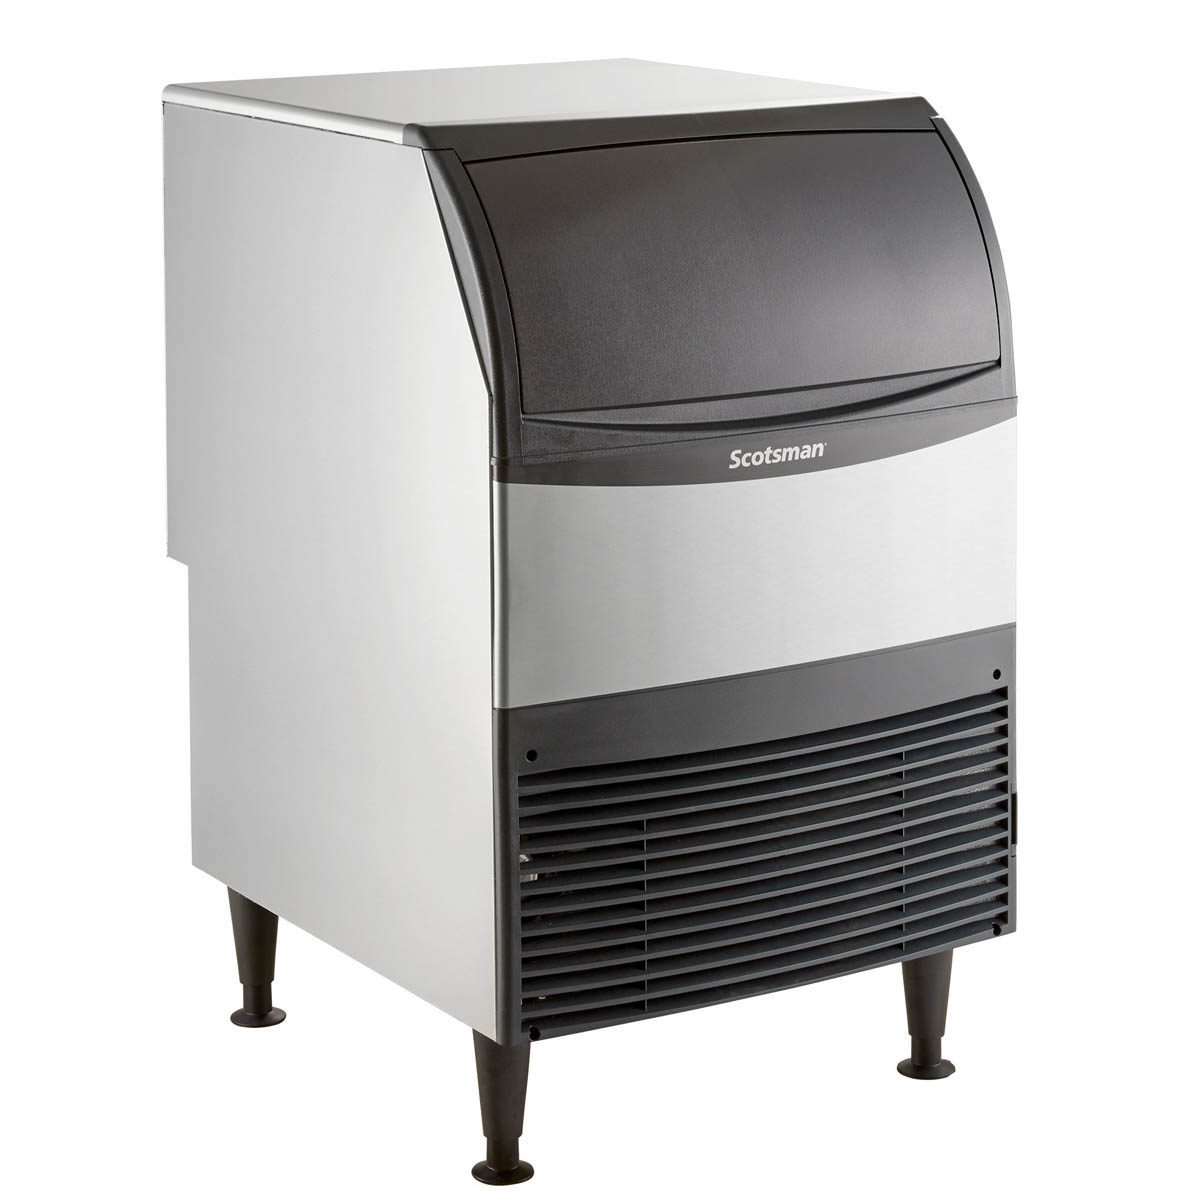 Scotsman UF424W-1 Provides Soft and Slow Melting For Your Service and Displays, Chef's Deal